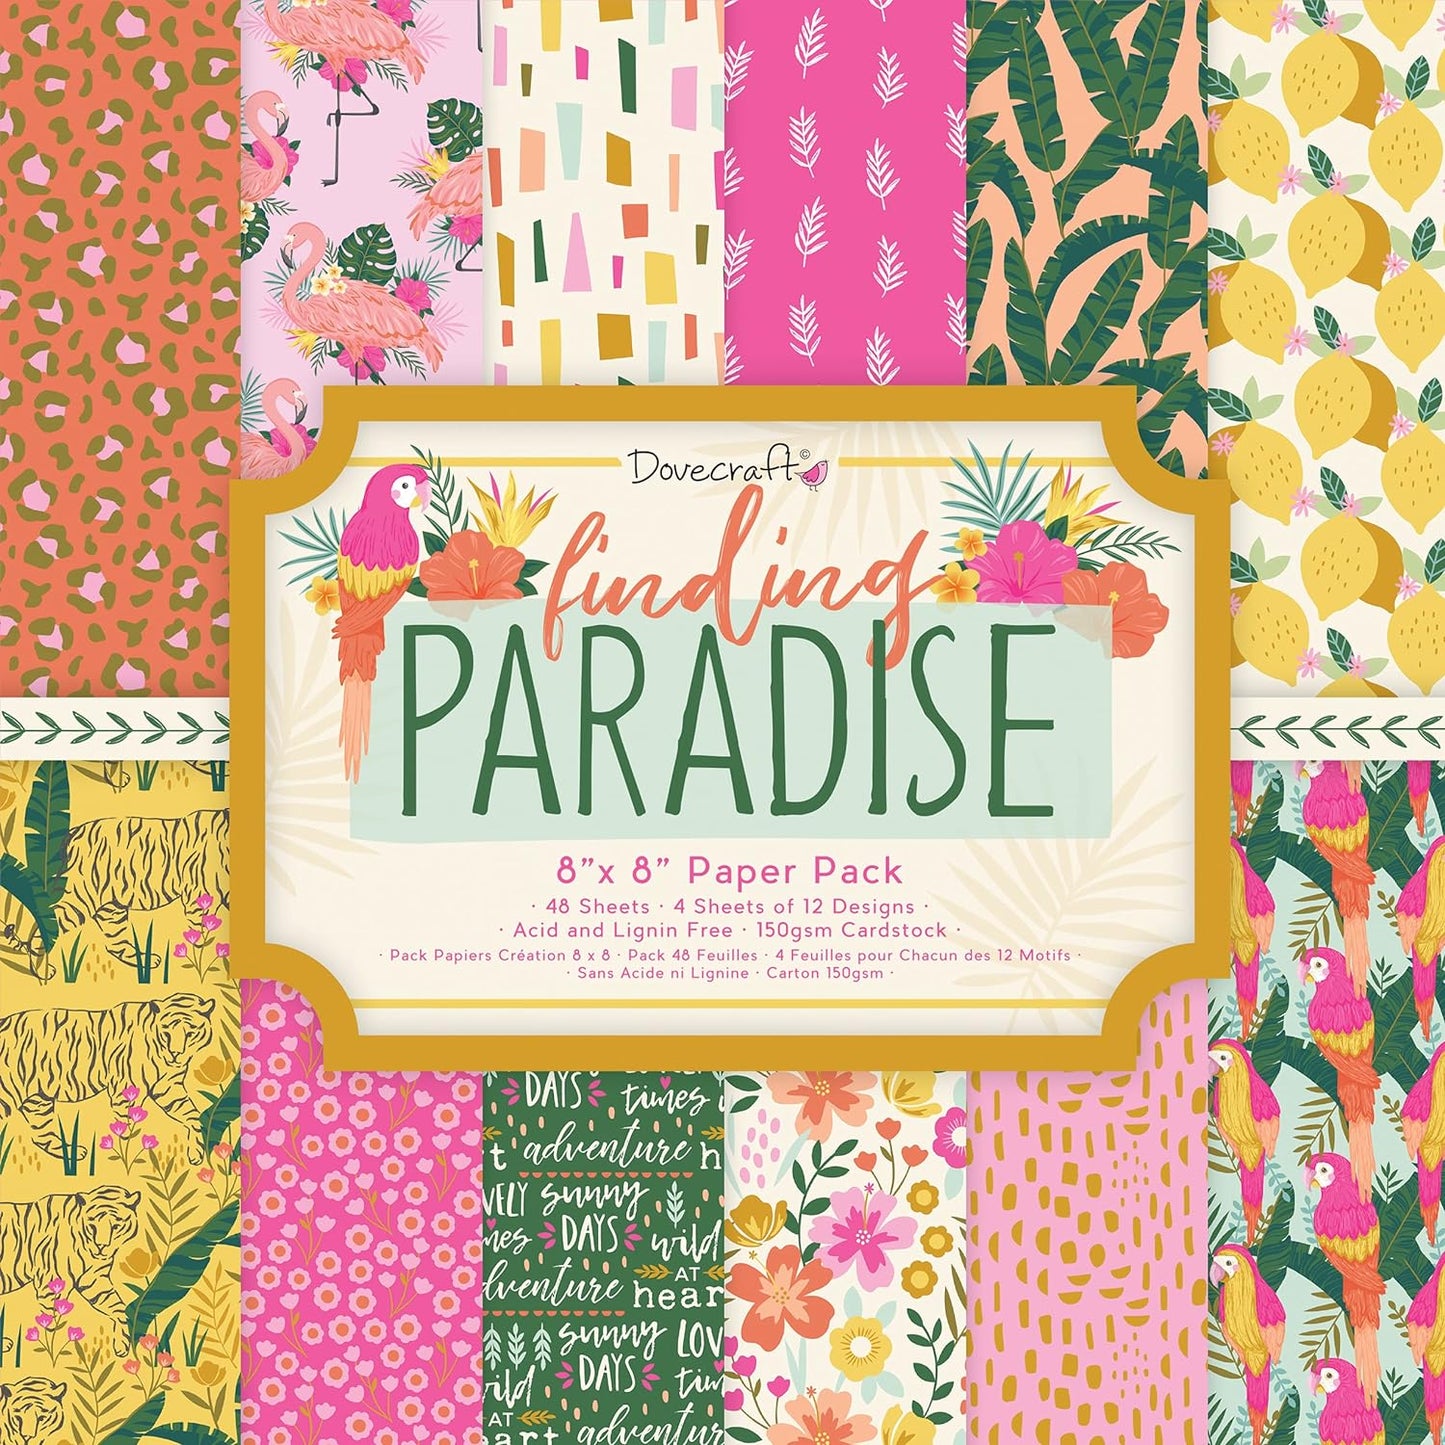 Dovecraft Pad 8x8" Finding Paradise